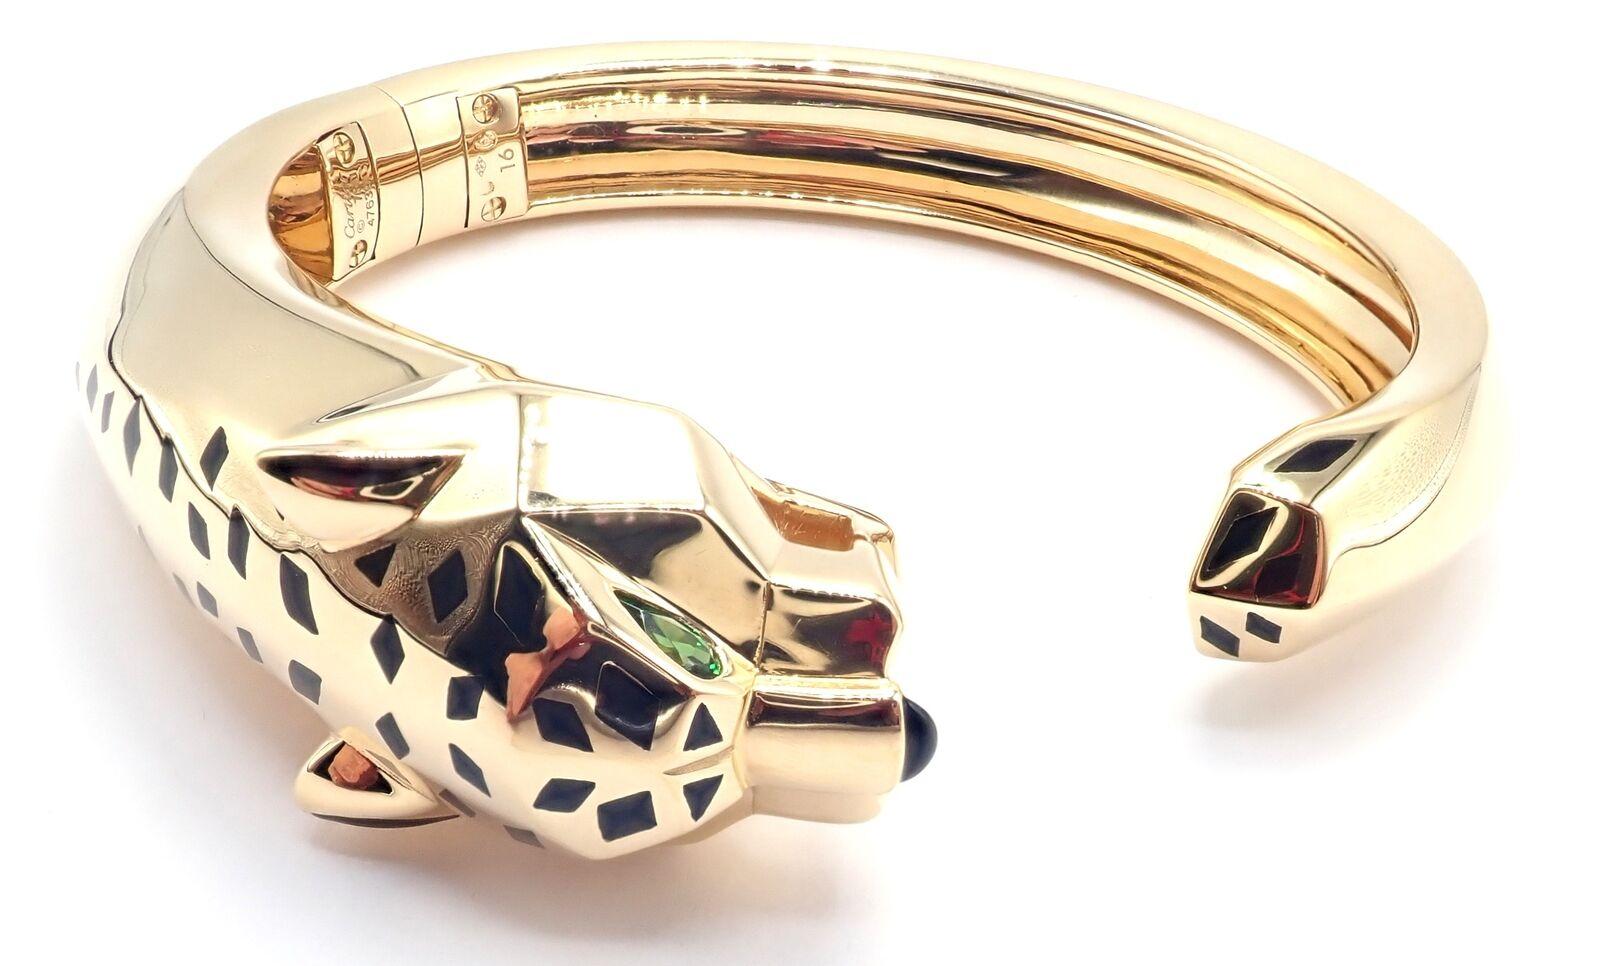 18k Yellow Gold Panther Panthere Tavorite Onyx  Size 16 Panther Bangle Bracelet by Cartier.
The Cartier Panther Panthere bangle is a luxurious piece, crafted in 18k yellow gold. 
This size 16 bracelet features the iconic panther motif, a symbol of